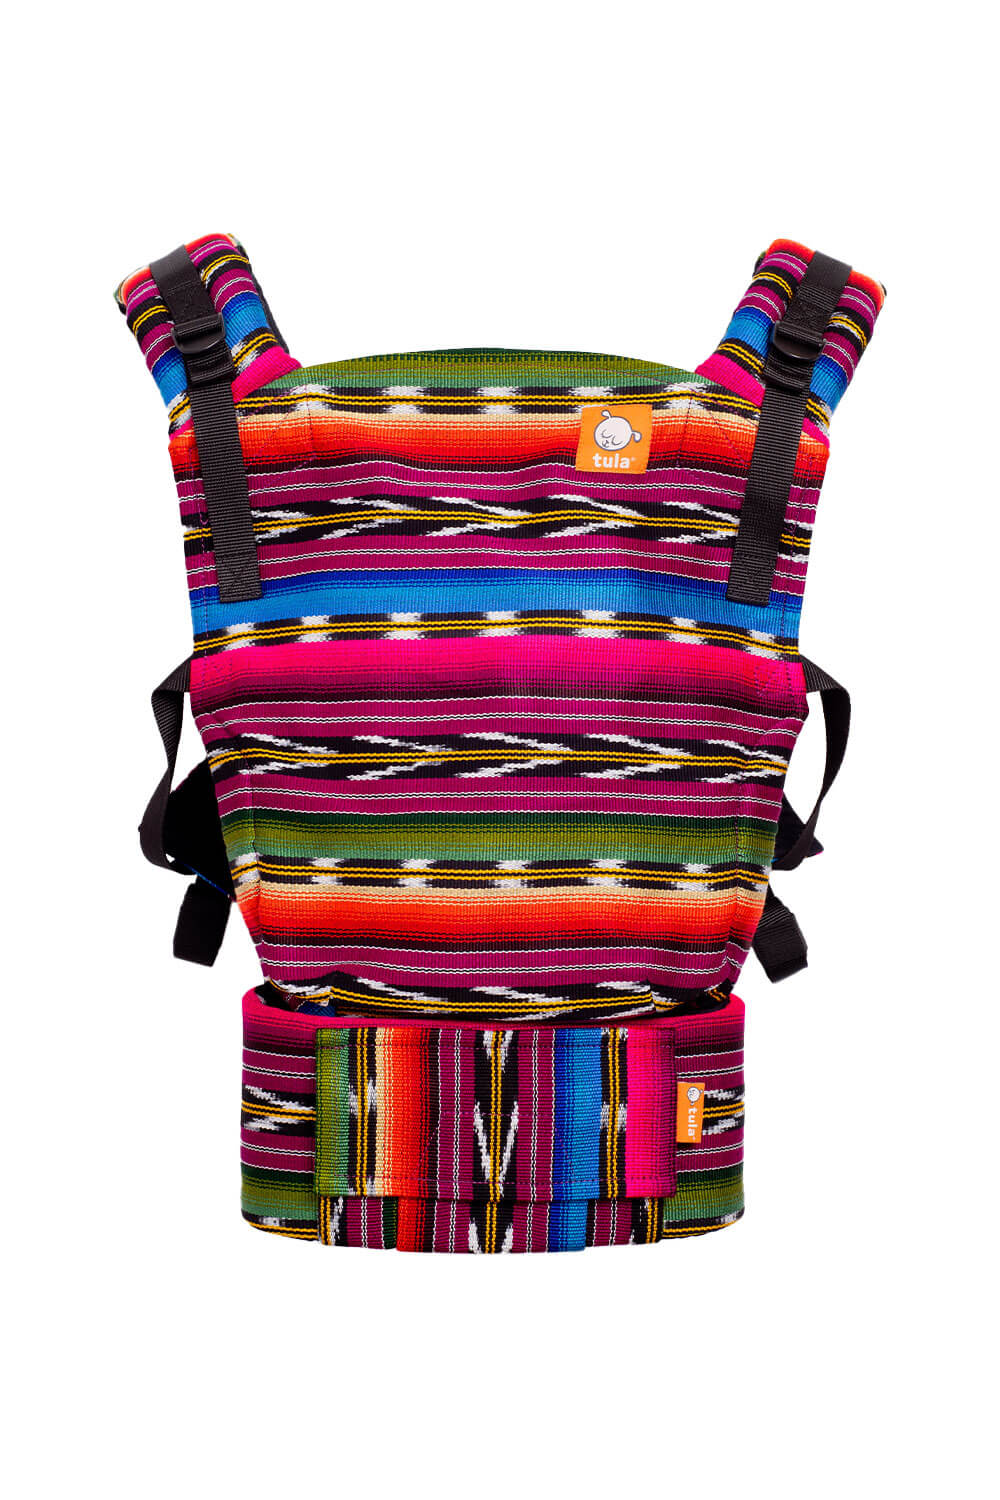 Rainbow Falls - Signature Woven Free-to-Grow Baby Carrier